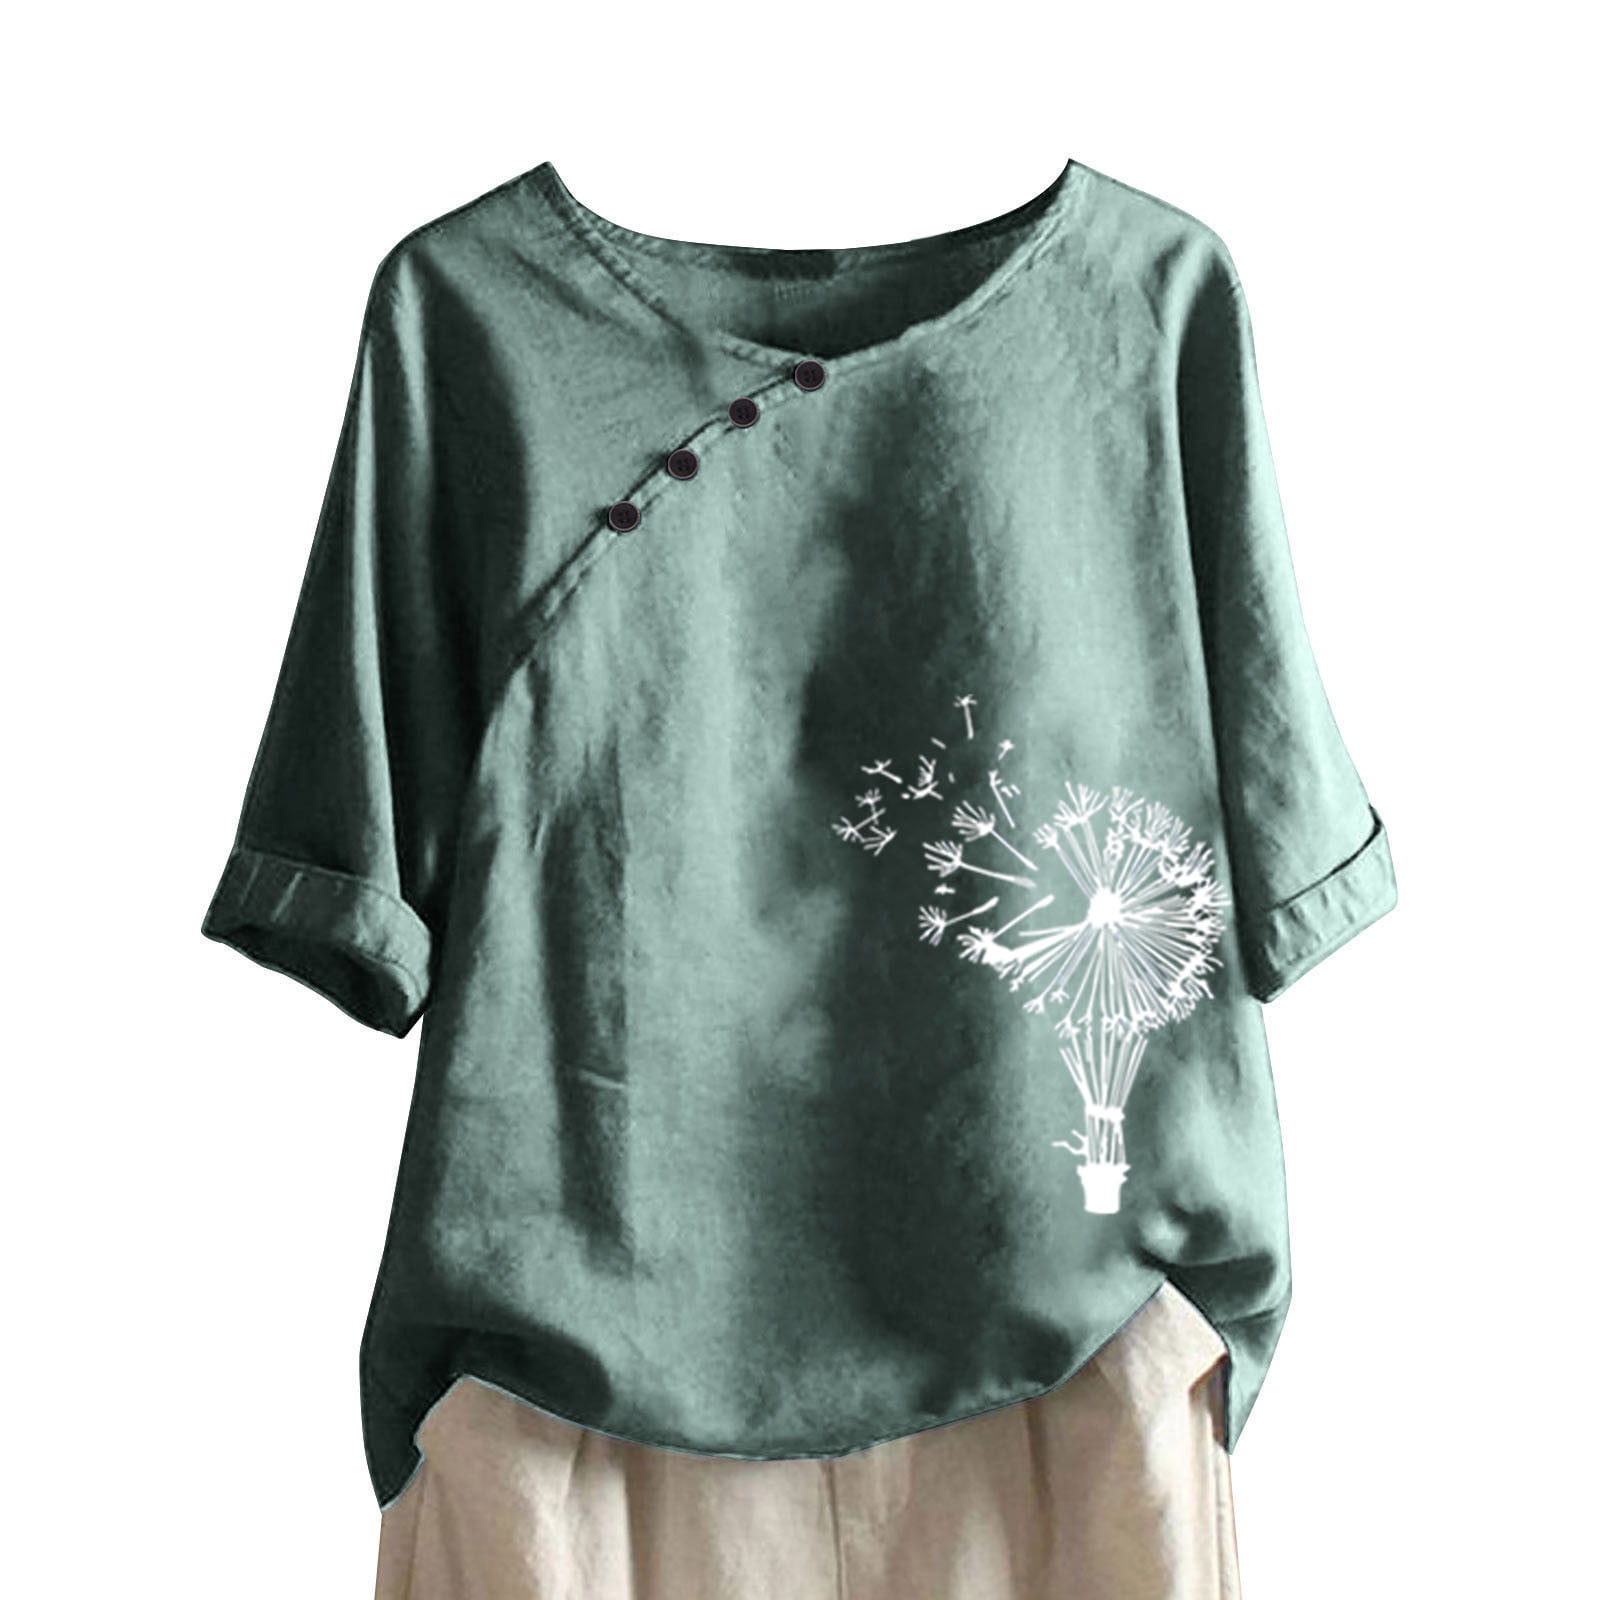 CQCYD Womens Linen Tops, Women Cotton and Linen T-Shirt Plus Size T-Shirt  Solid Color Crewneck Short Sleeve Top Printed Pullover Seven-Point Sleeve  Top Sales Today Clearance Green M 